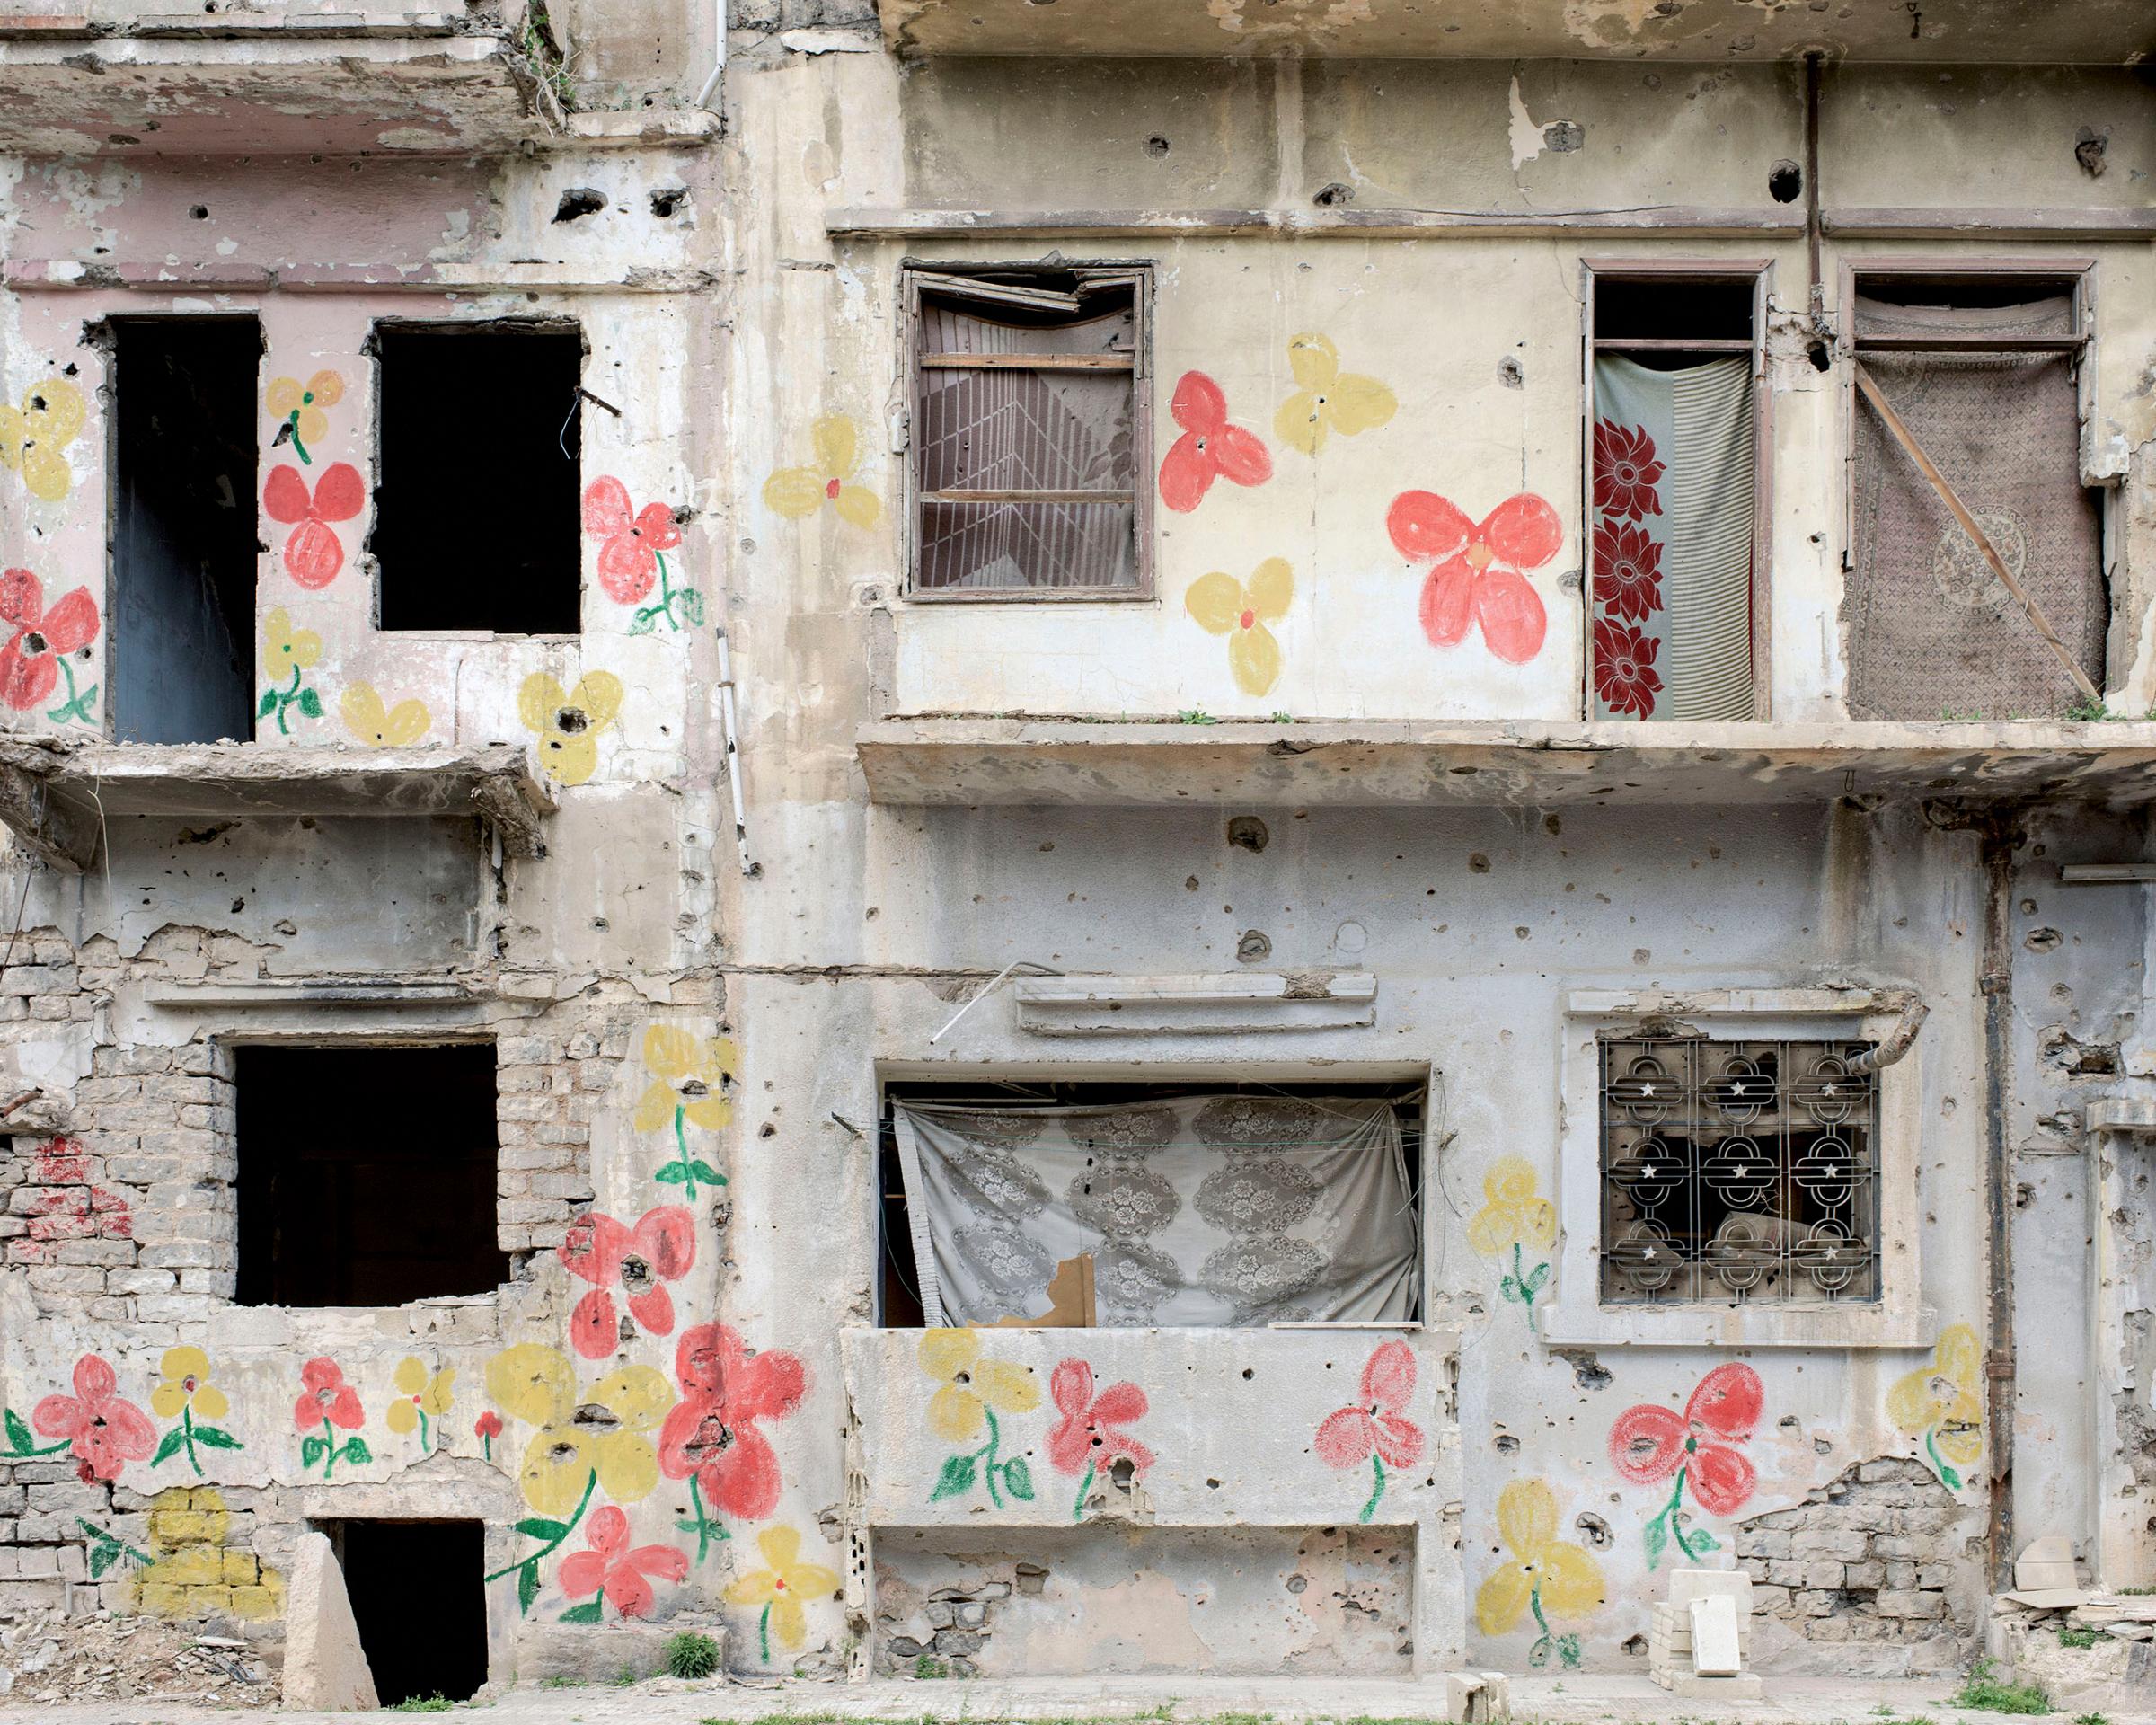 Paintings of flowers are seen on a destroyed building in Homs, Syria, March 2016.